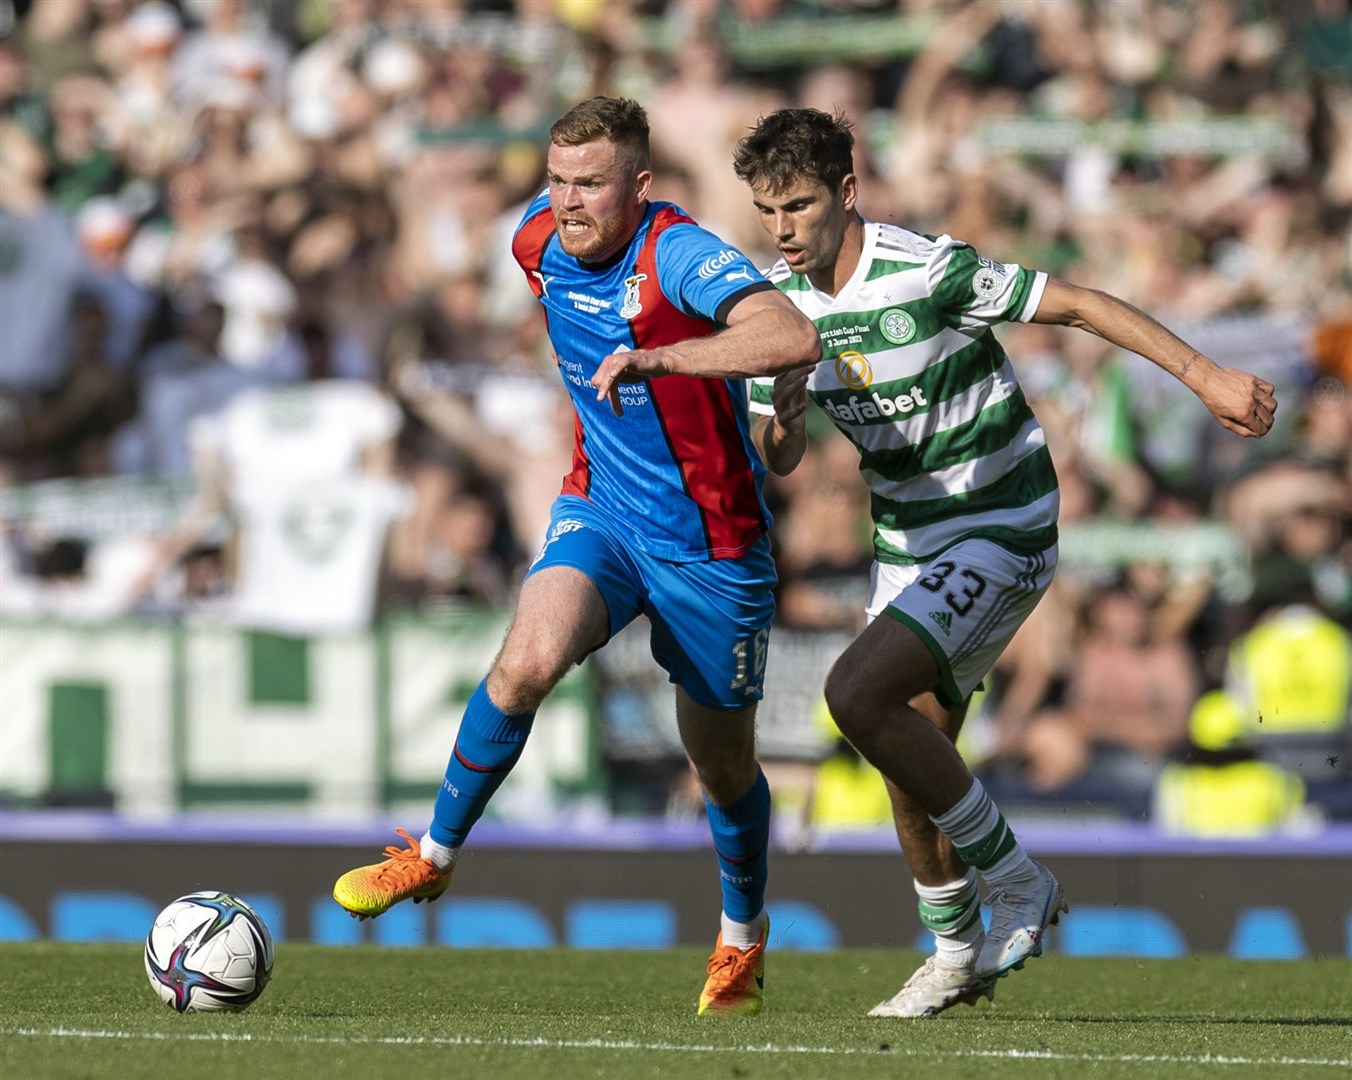 Scott Allardice, now of Ross County, in action for Caley Thistle in June's Scottish Cup final against Celtic’s Matt O'Riley.